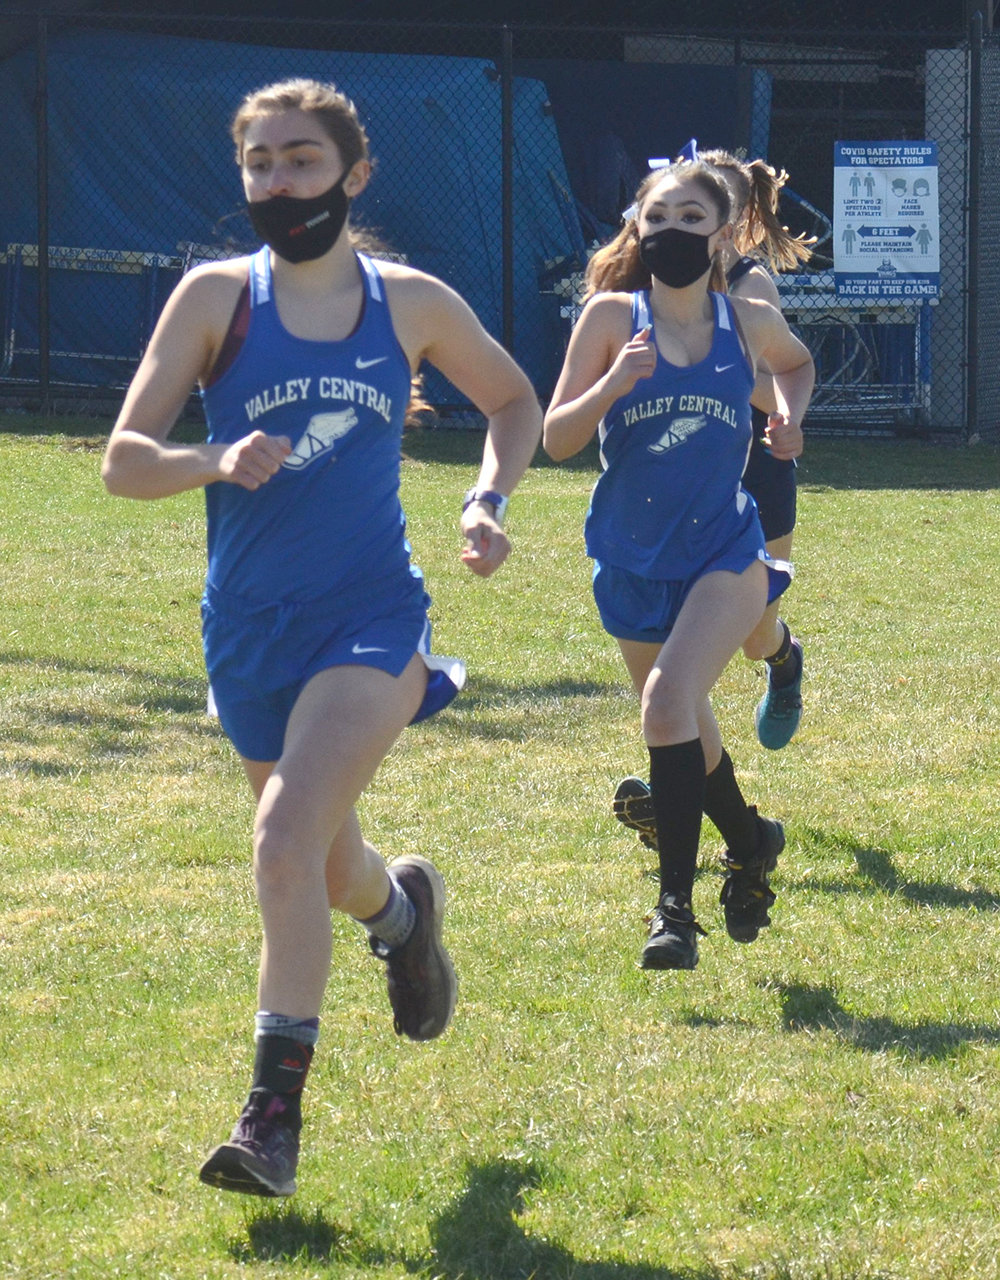 Valley Central’s Kelly O’Connor and Lucy Campay run at the start of Tuesday’s cross country race at Valley Central High School in Montgomery.